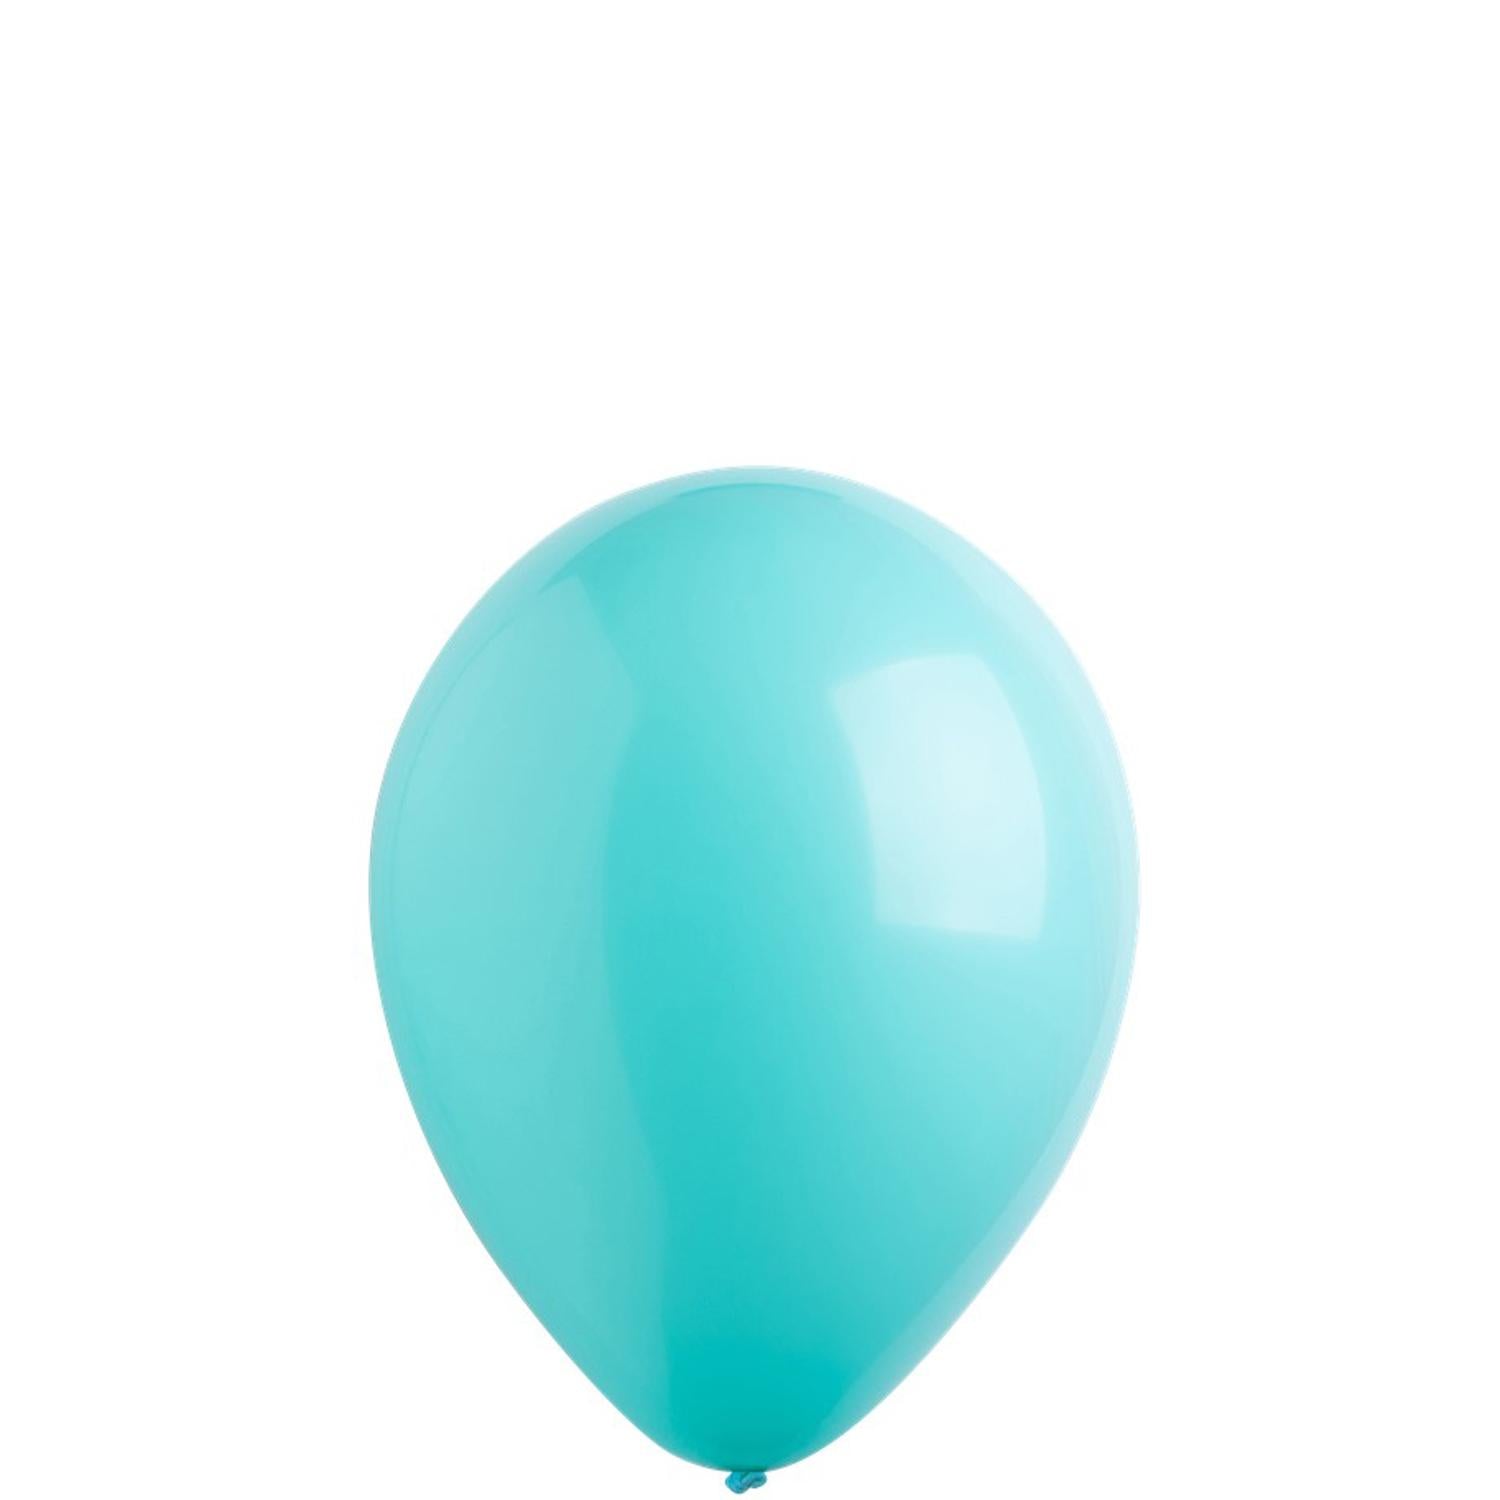 Robins Egg Blue Fashion Latex Balloons 5in, 100pcs Balloons & Streamers - Party Centre